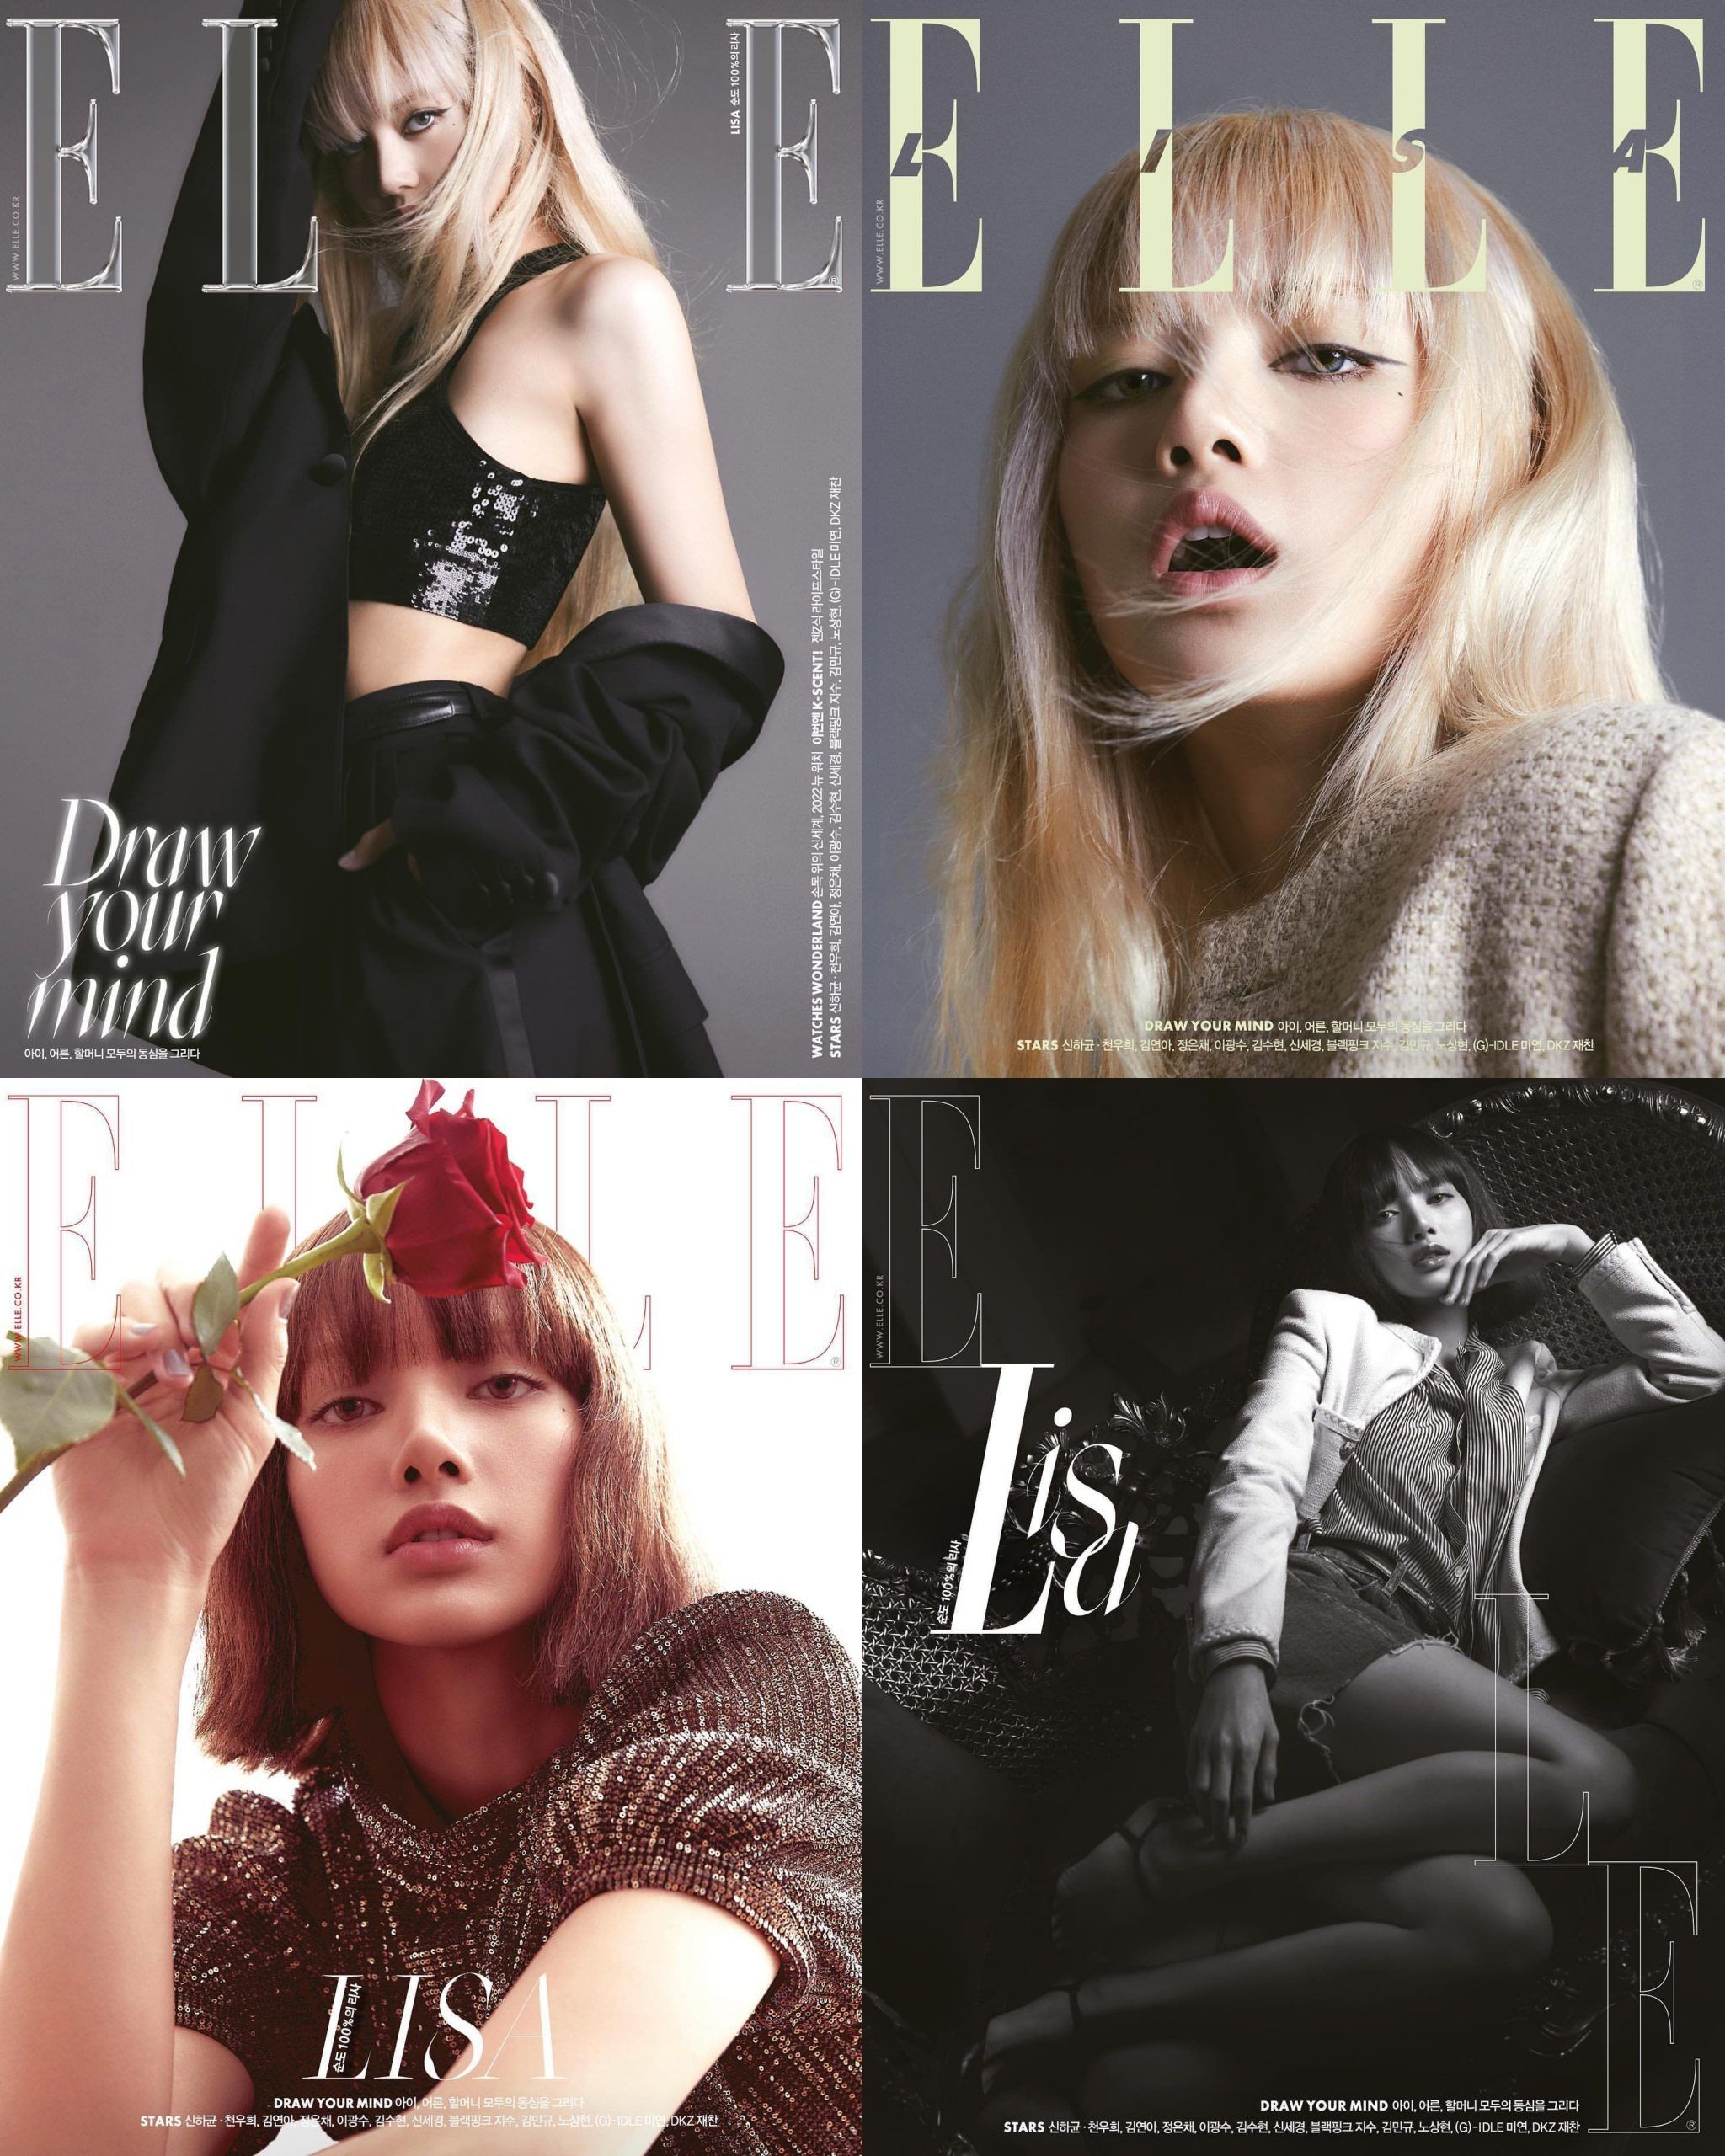 Blackpink Lisa's clothes from Elle Korea fashion magazine covers sold out!